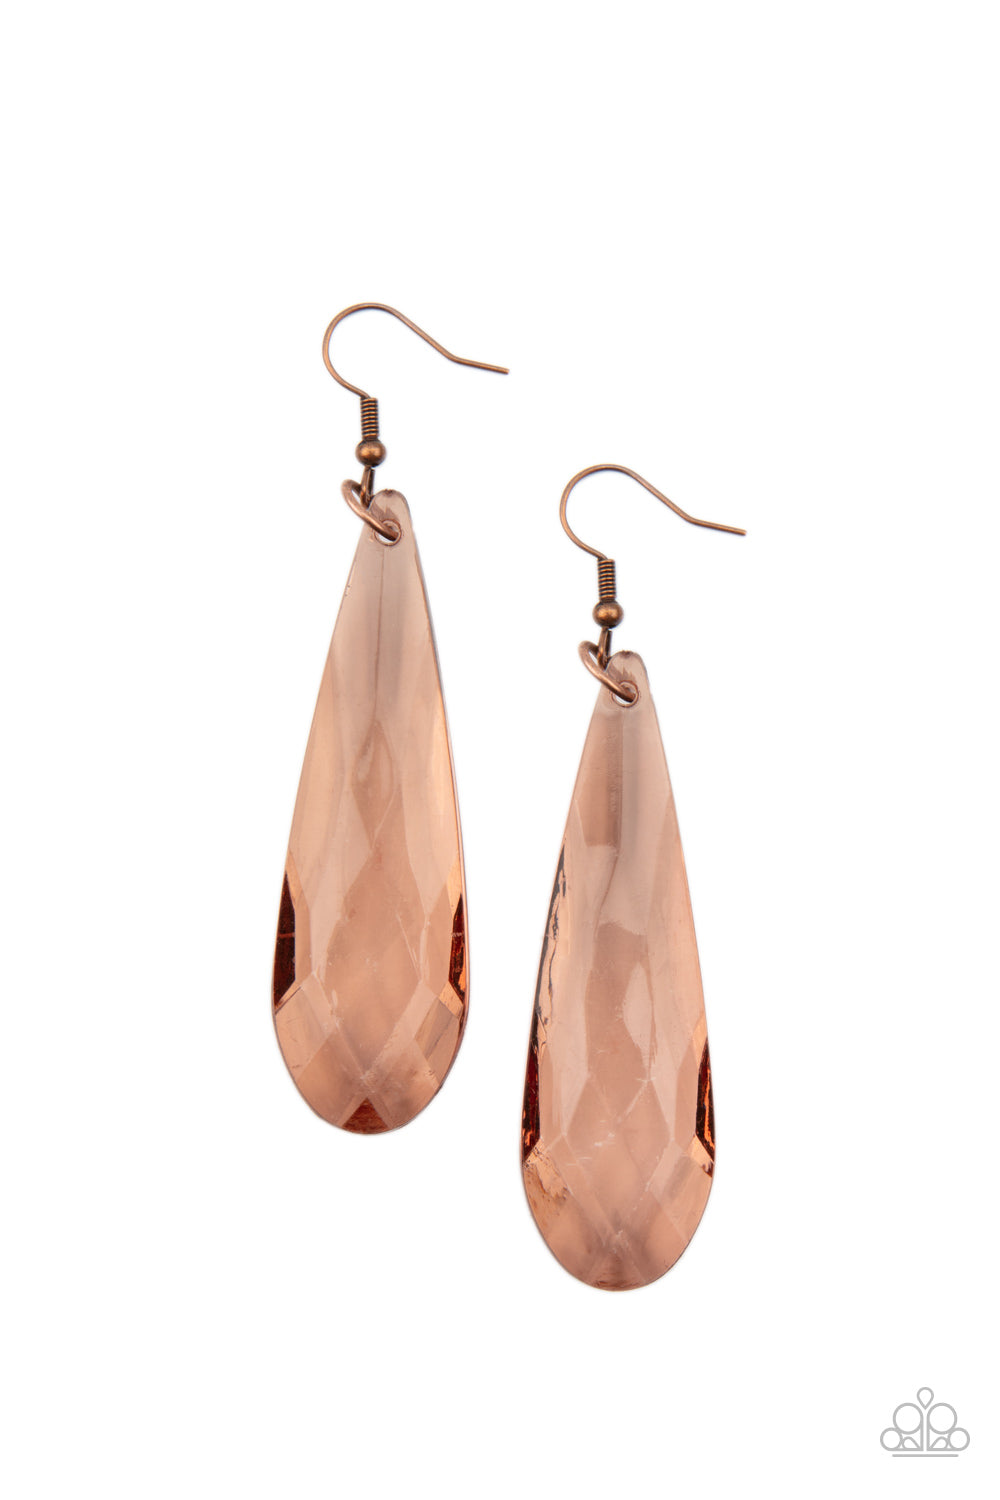 Crystal Crowns - Copper - Spiffy Chick Jewelry